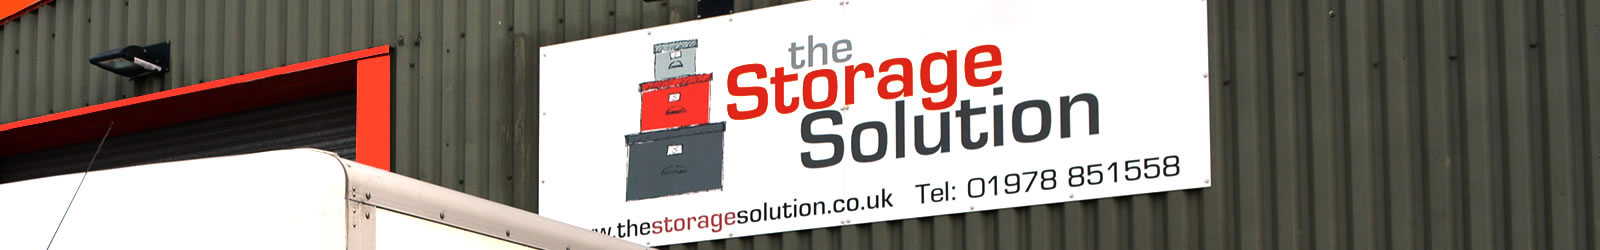 Warehouse of The Storage Solution in Llay, Wrexham